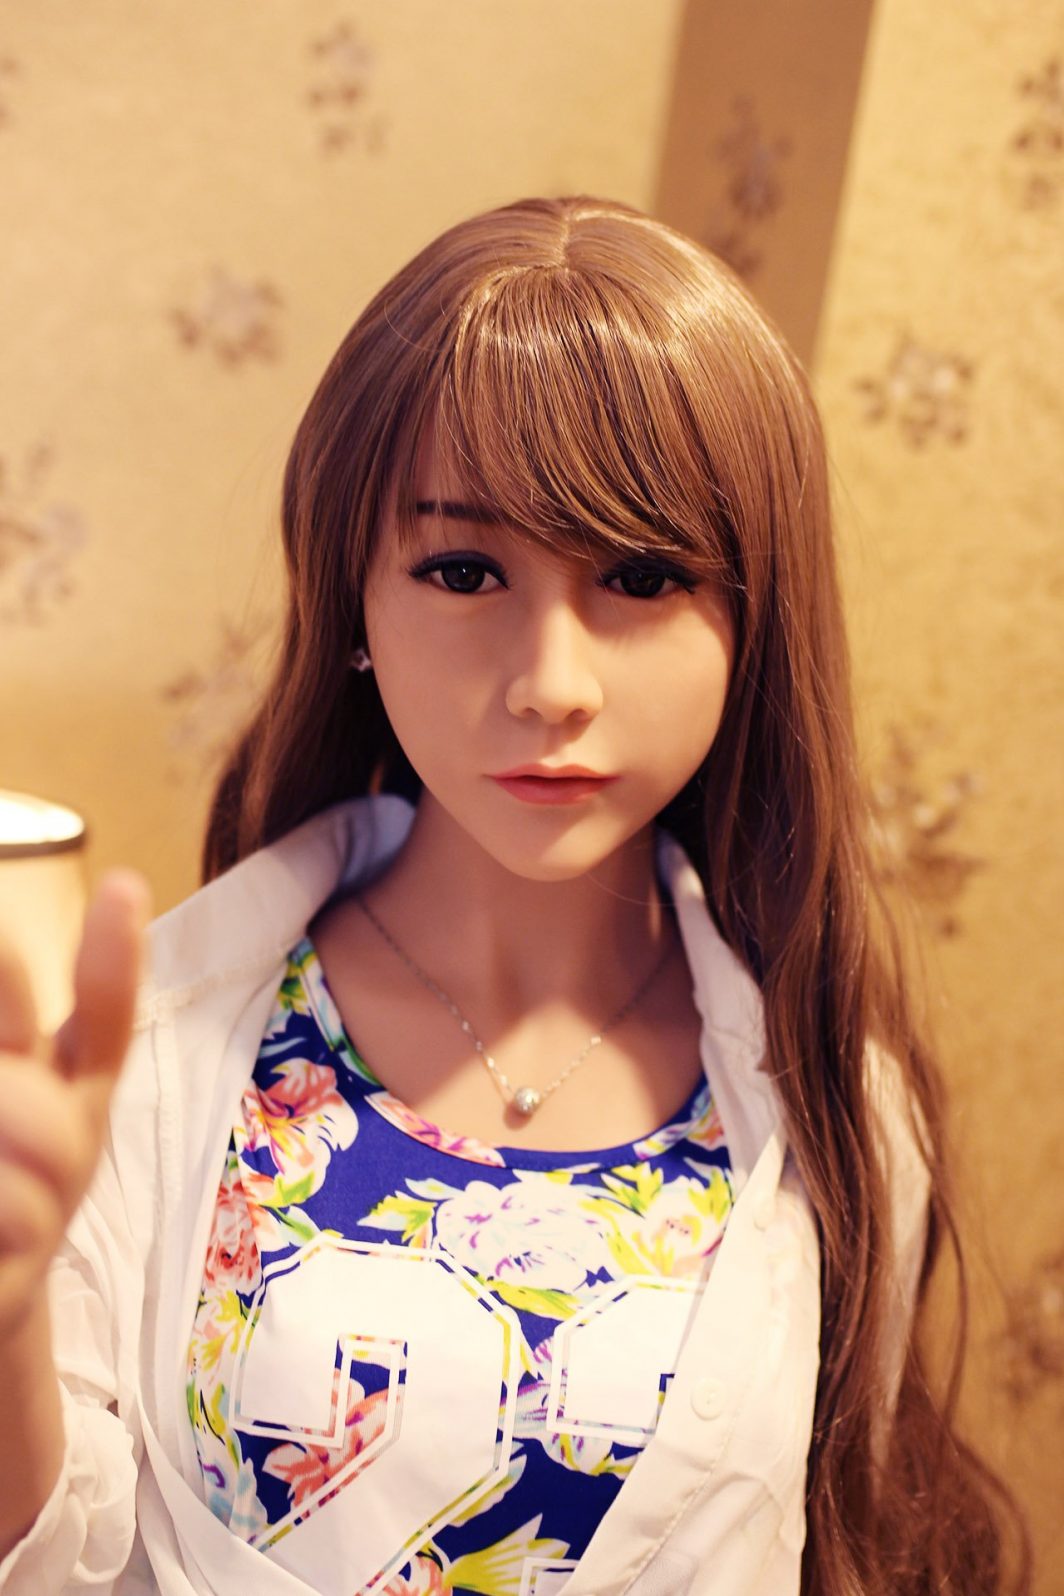 Japanese Realistic Sex Doll - Vicky